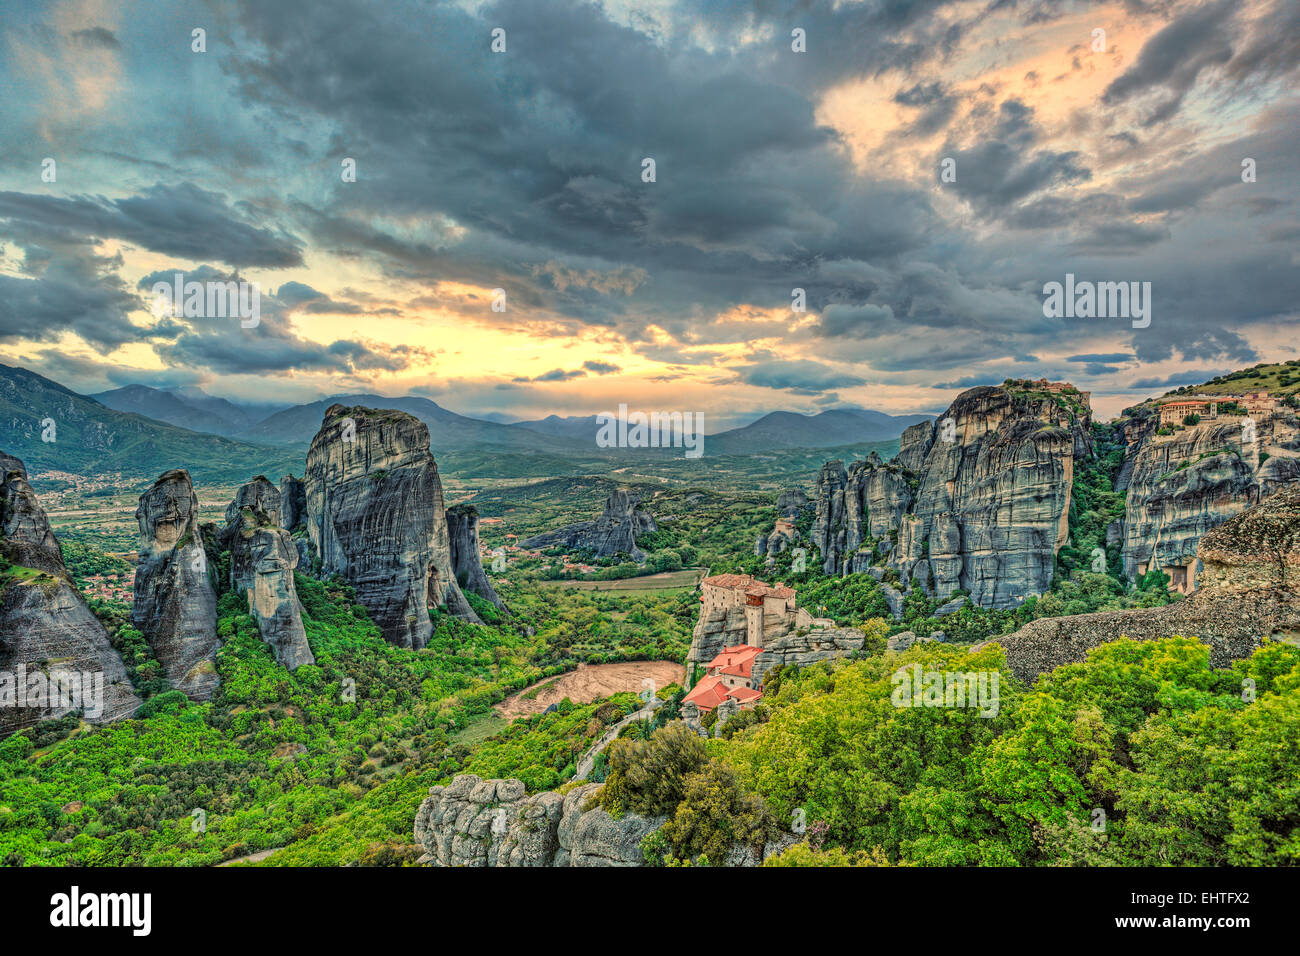 Monasteries on the top of Giant rocks seem miraculous and make Meteora one of the most spectacular places in Greece. Stock Photo